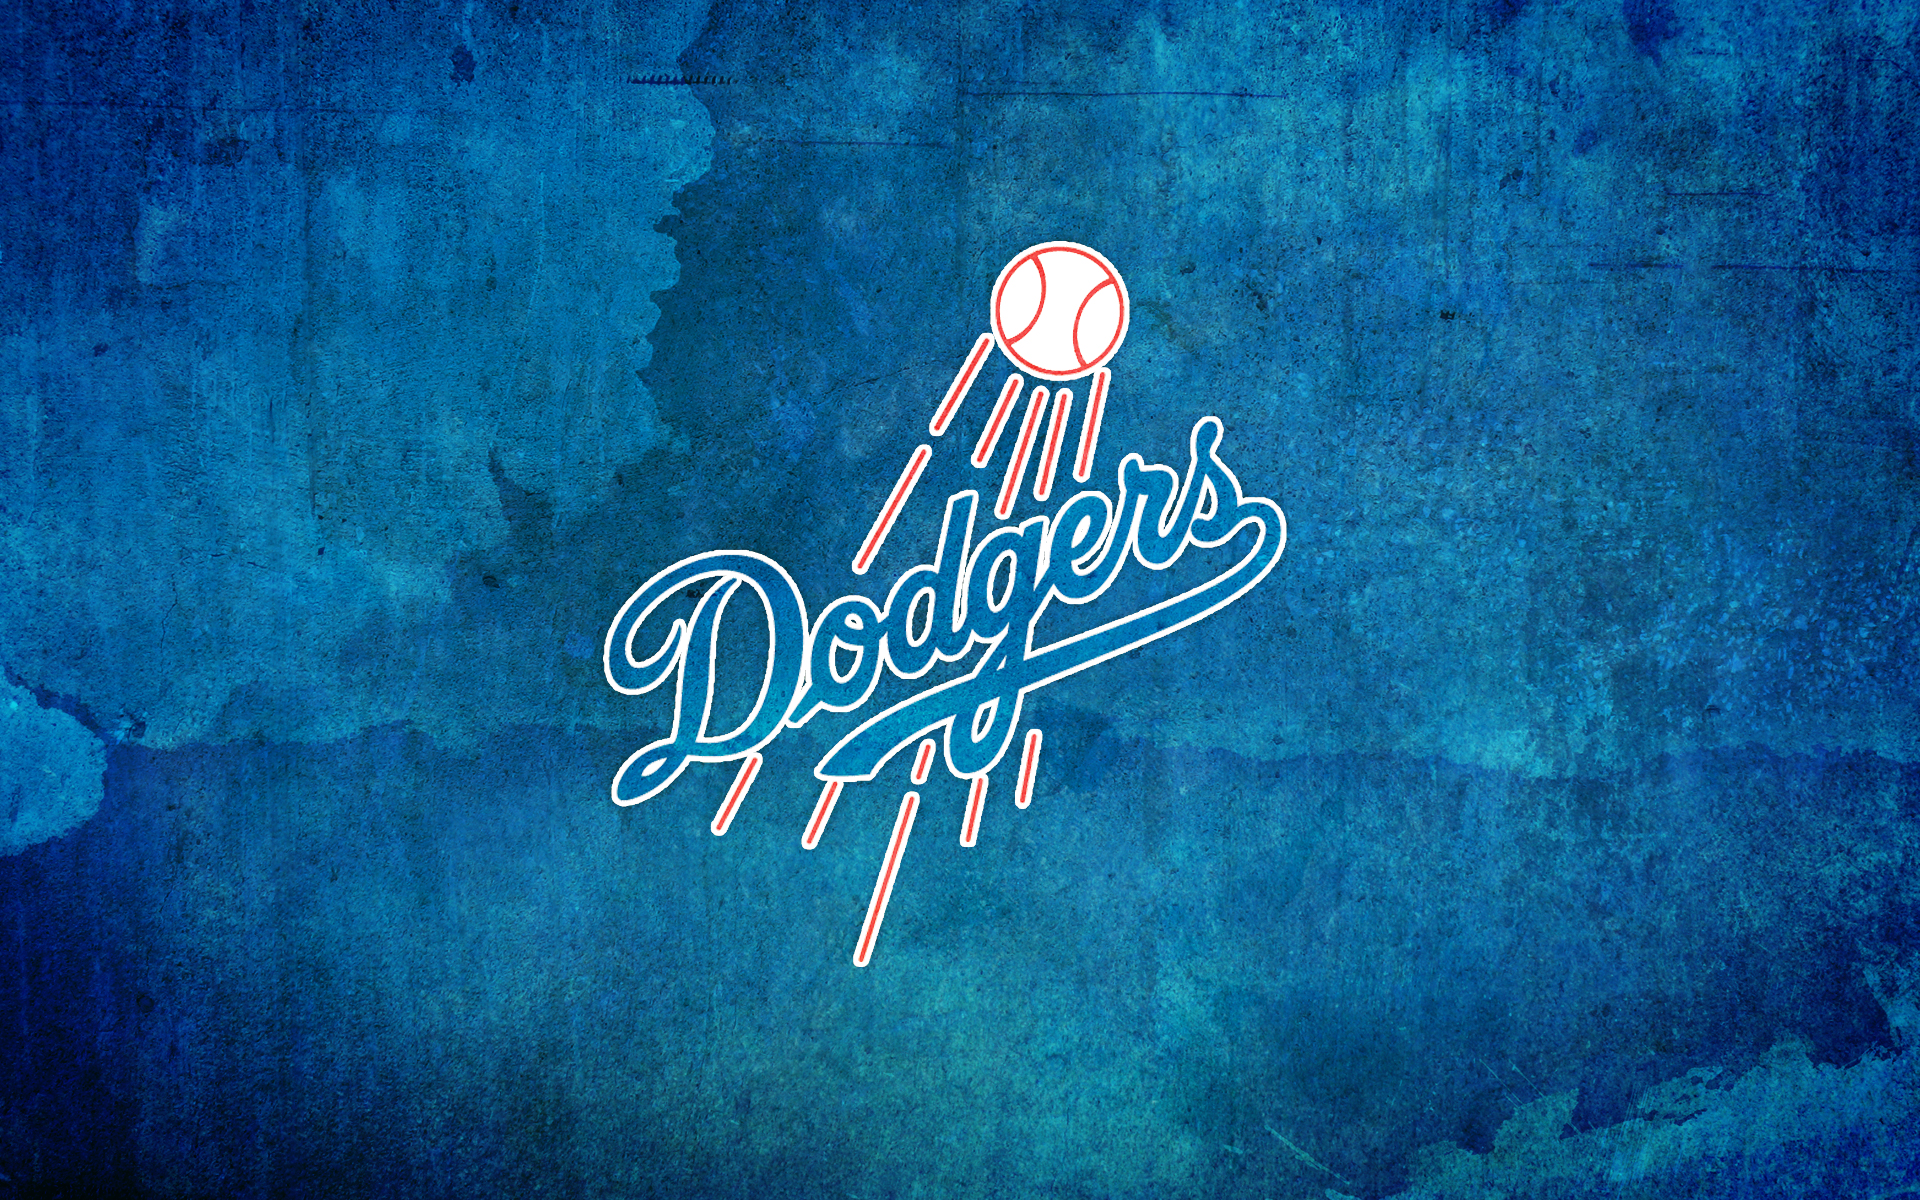 Awesome Los Angeles Dodgers wallpaper